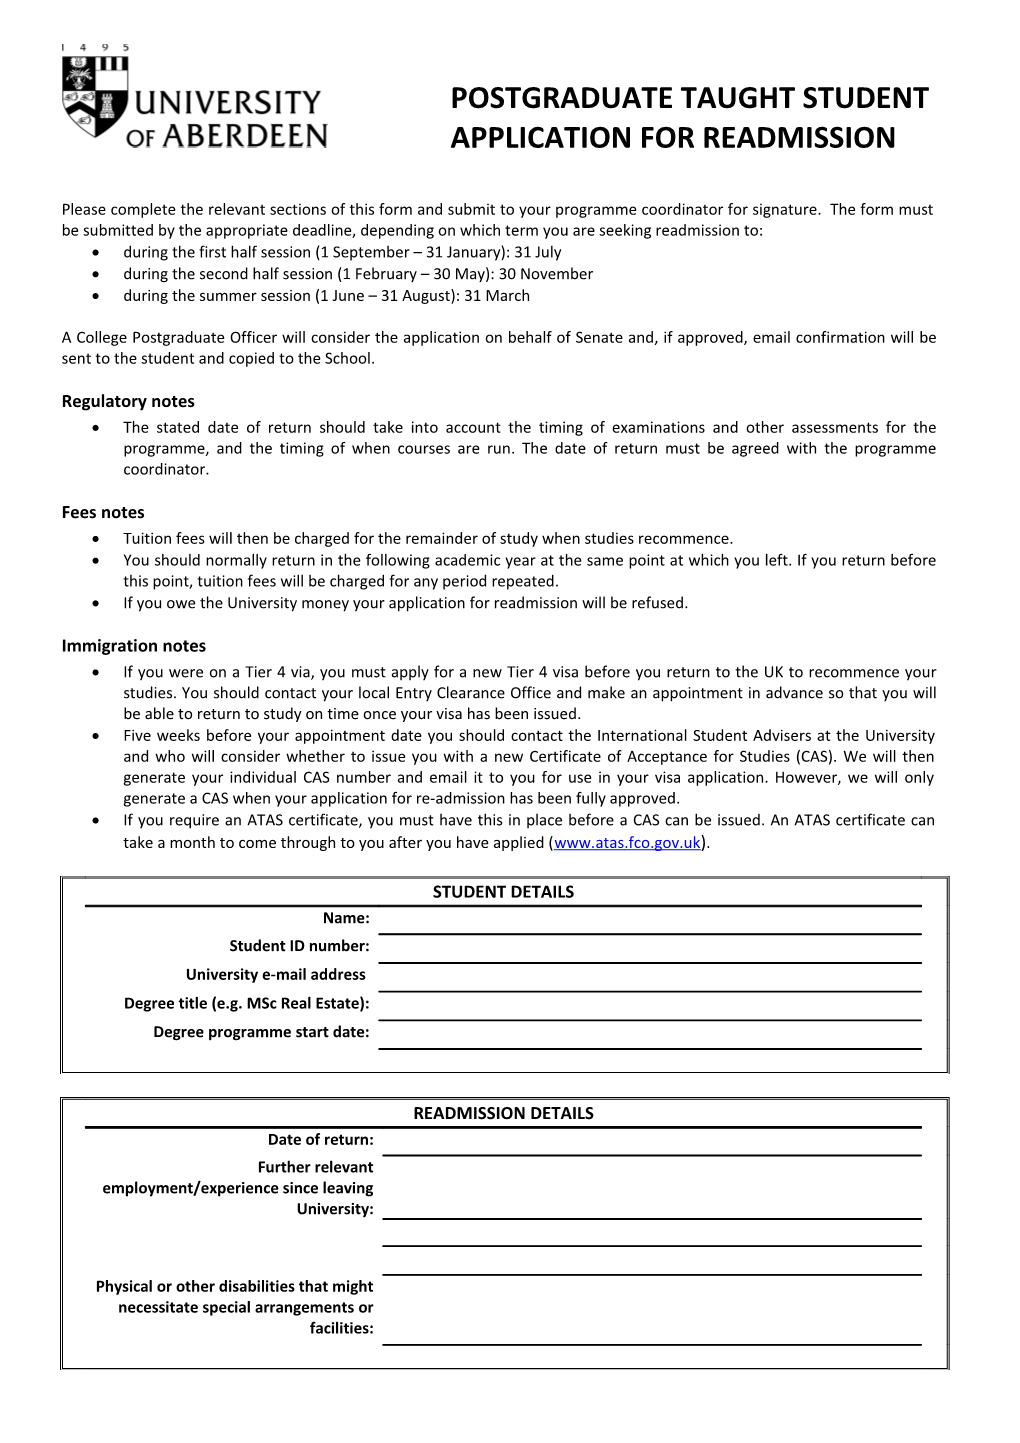 Postgraduate Taught Student Application for Readmission